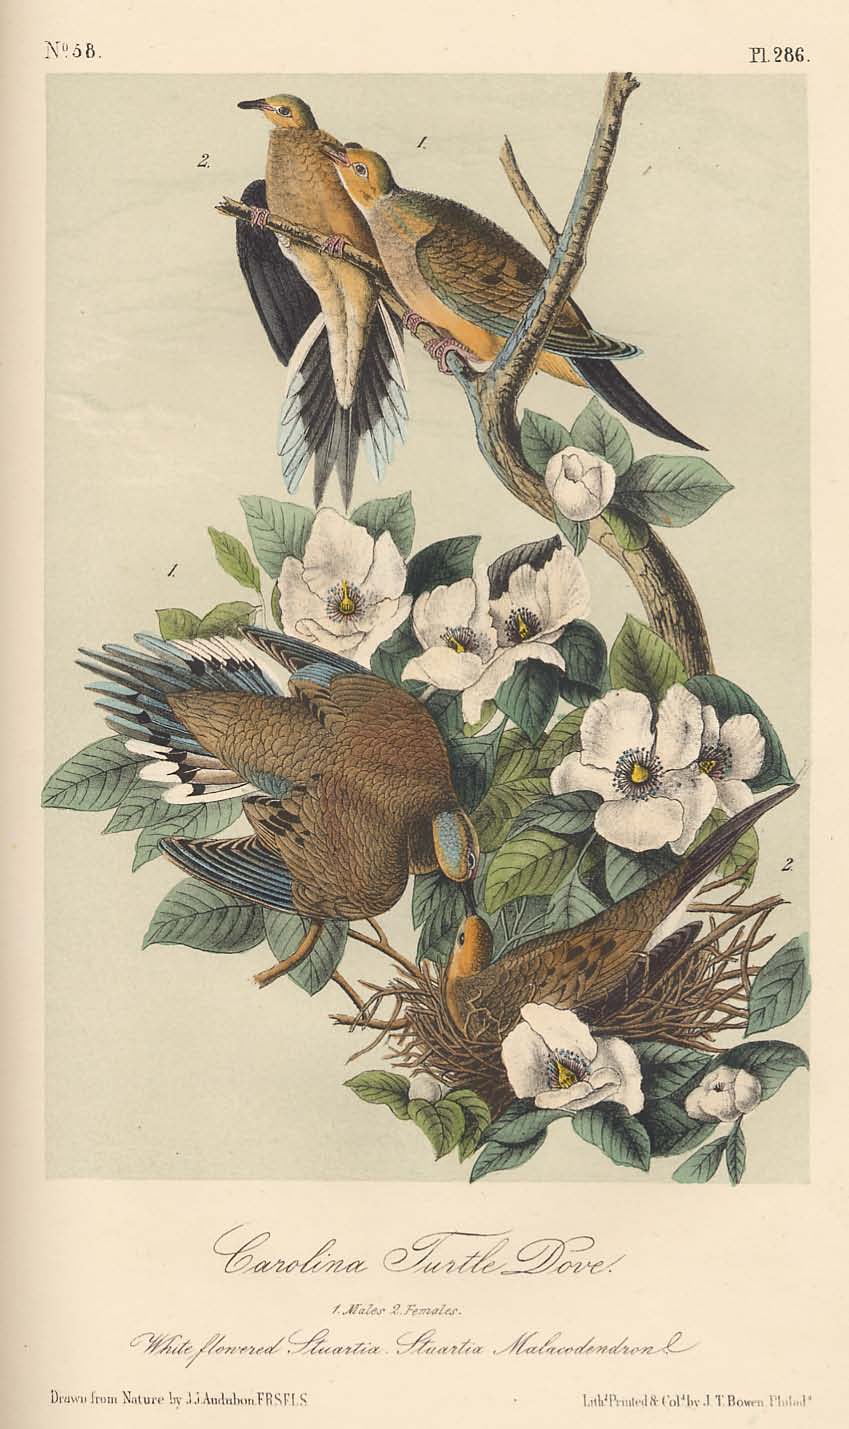 The birds of America : Vol. 5 : from drawings made in the United States and their territories / by John James Audubon, F.R.S., etc. — Published by V. G. Audubon, 1856